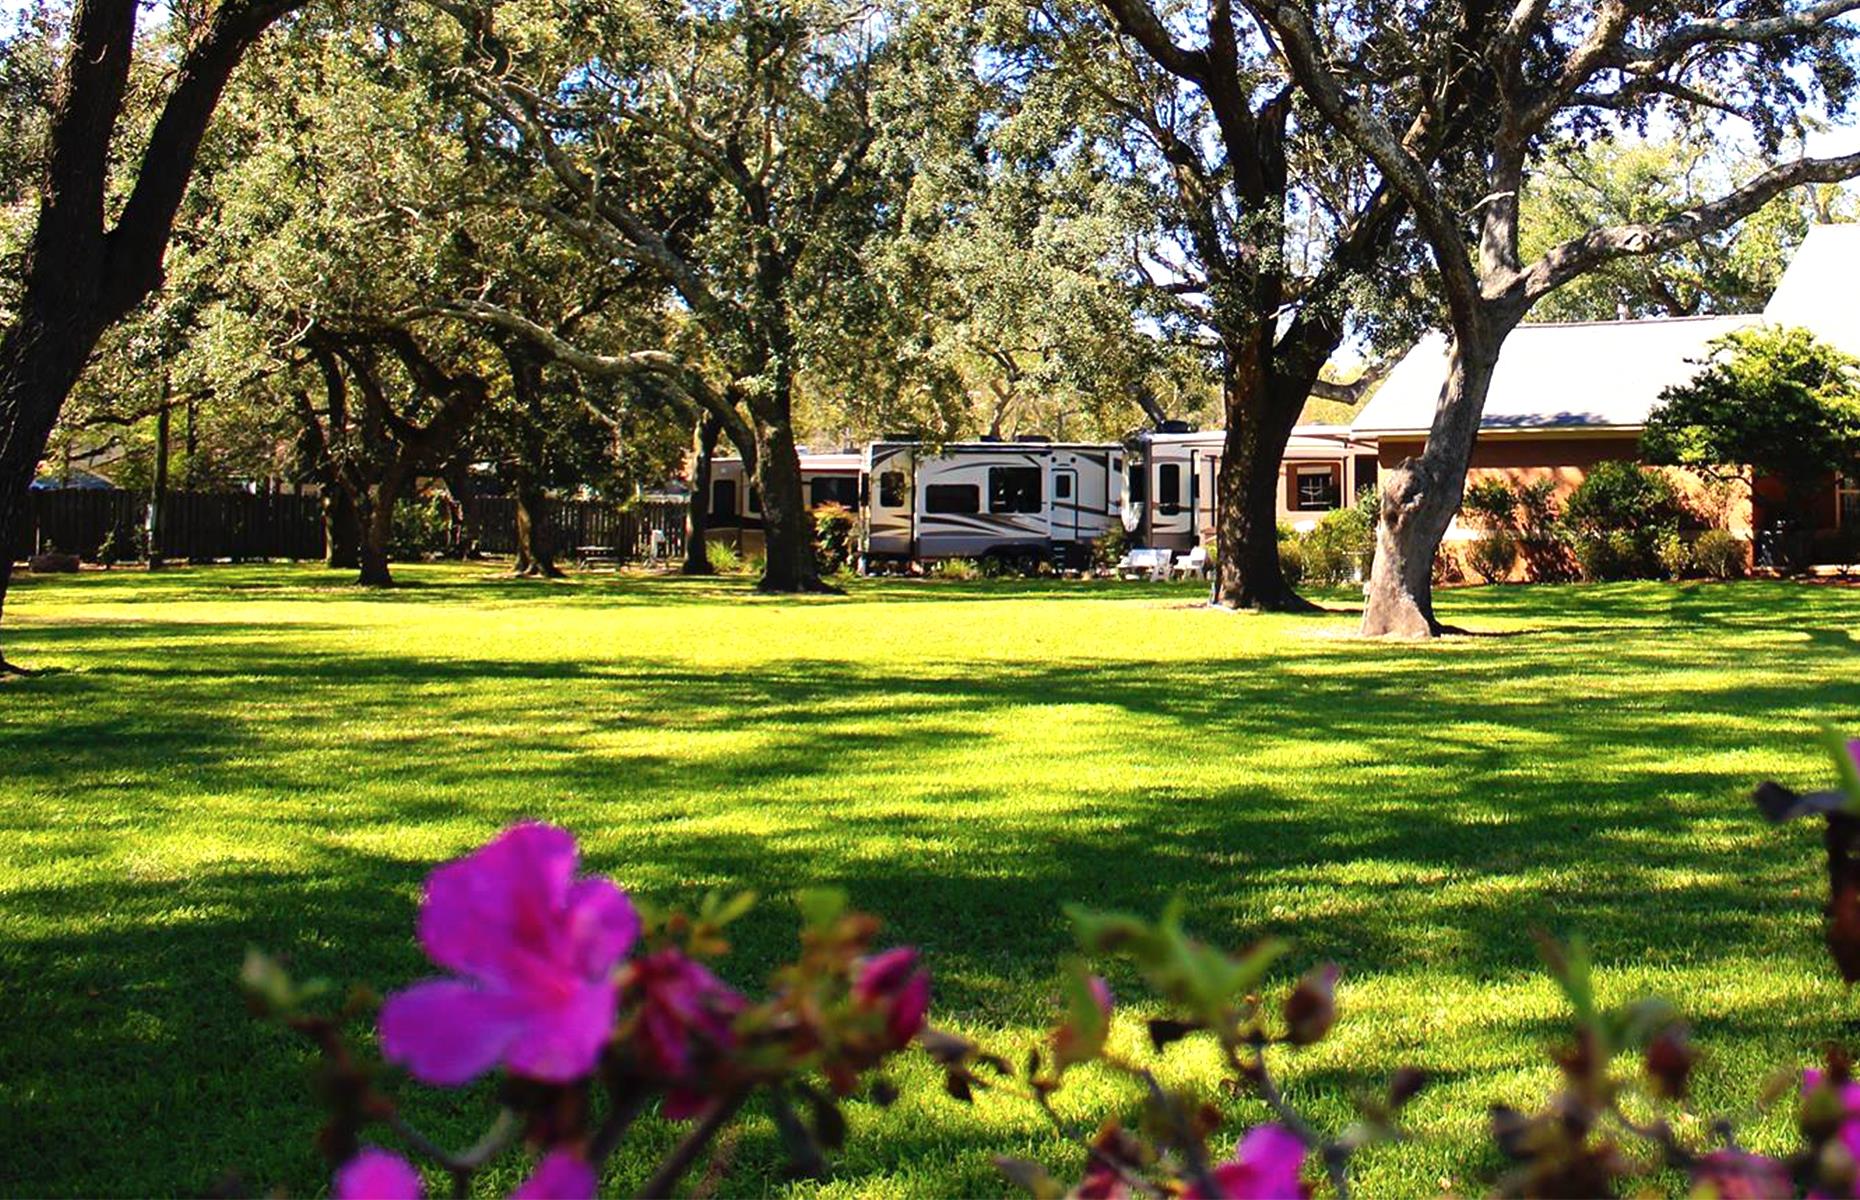 <p><a href="http://unitedrvresorts.com/majestic-oaks/">This smart park</a> in Biloxi is known for its immaculate grounds decorated with flowers and oaks, plus its swimming pool, gleaming bathhouses and full hook-up lots. Southern hospitality is a great source of pride here – typically cookouts and other fun organized events are commonplace, but double check what's on before your stay. The Gulf Coast's sought-after beaches are close by too. <a href="https://www.loveexploring.com/galleries/94776/99-beautiful-things-we-love-about-america?page=1">Now discover 99 more beautiful things we love about America</a>.</p>